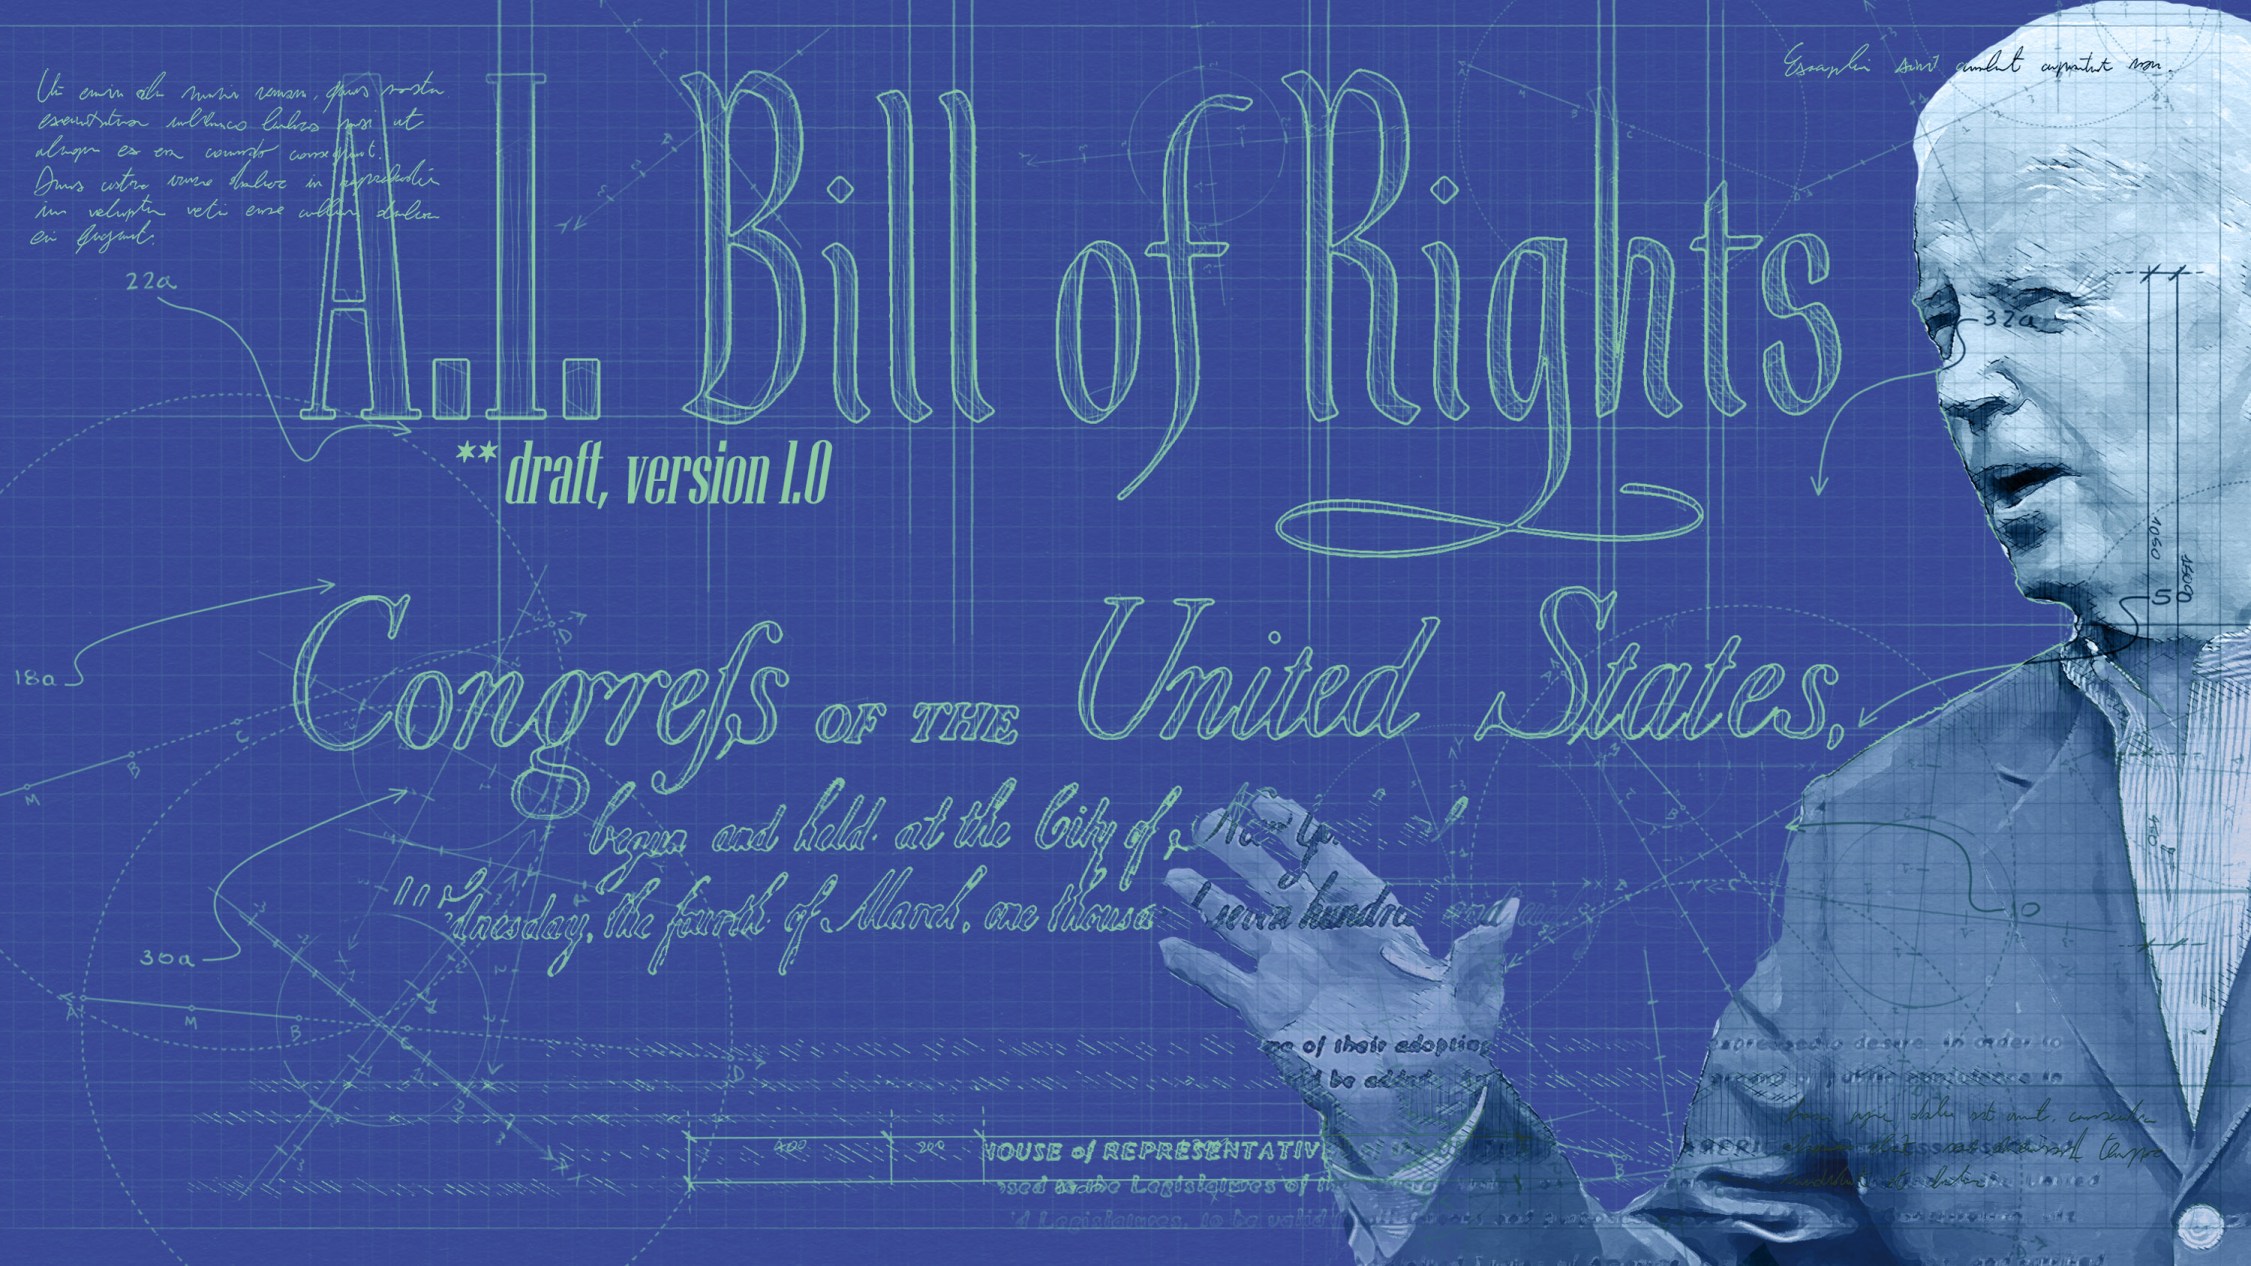 The White House just unveiled a new AI Bill of Rights